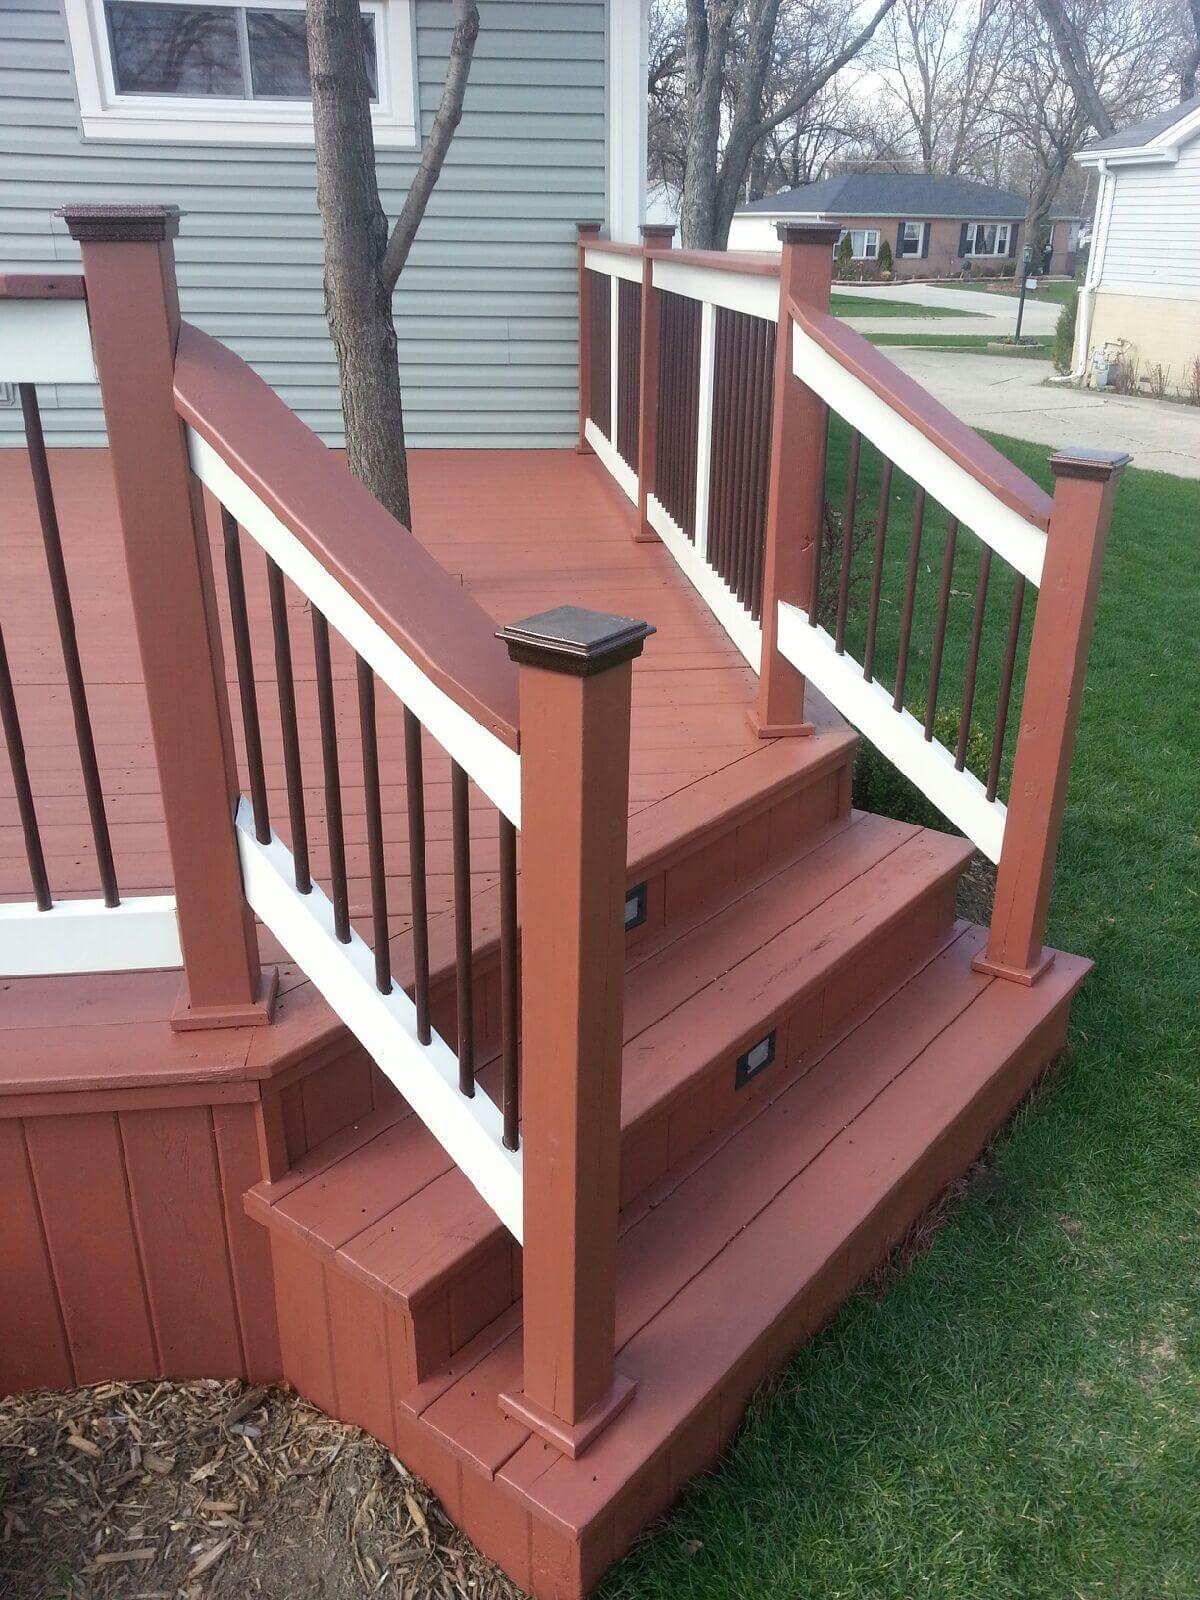 Repairs and maintenance for your deck, fence, and exterior wood staining. - Deck Staining Park Ridge - Deck Cleaning Services